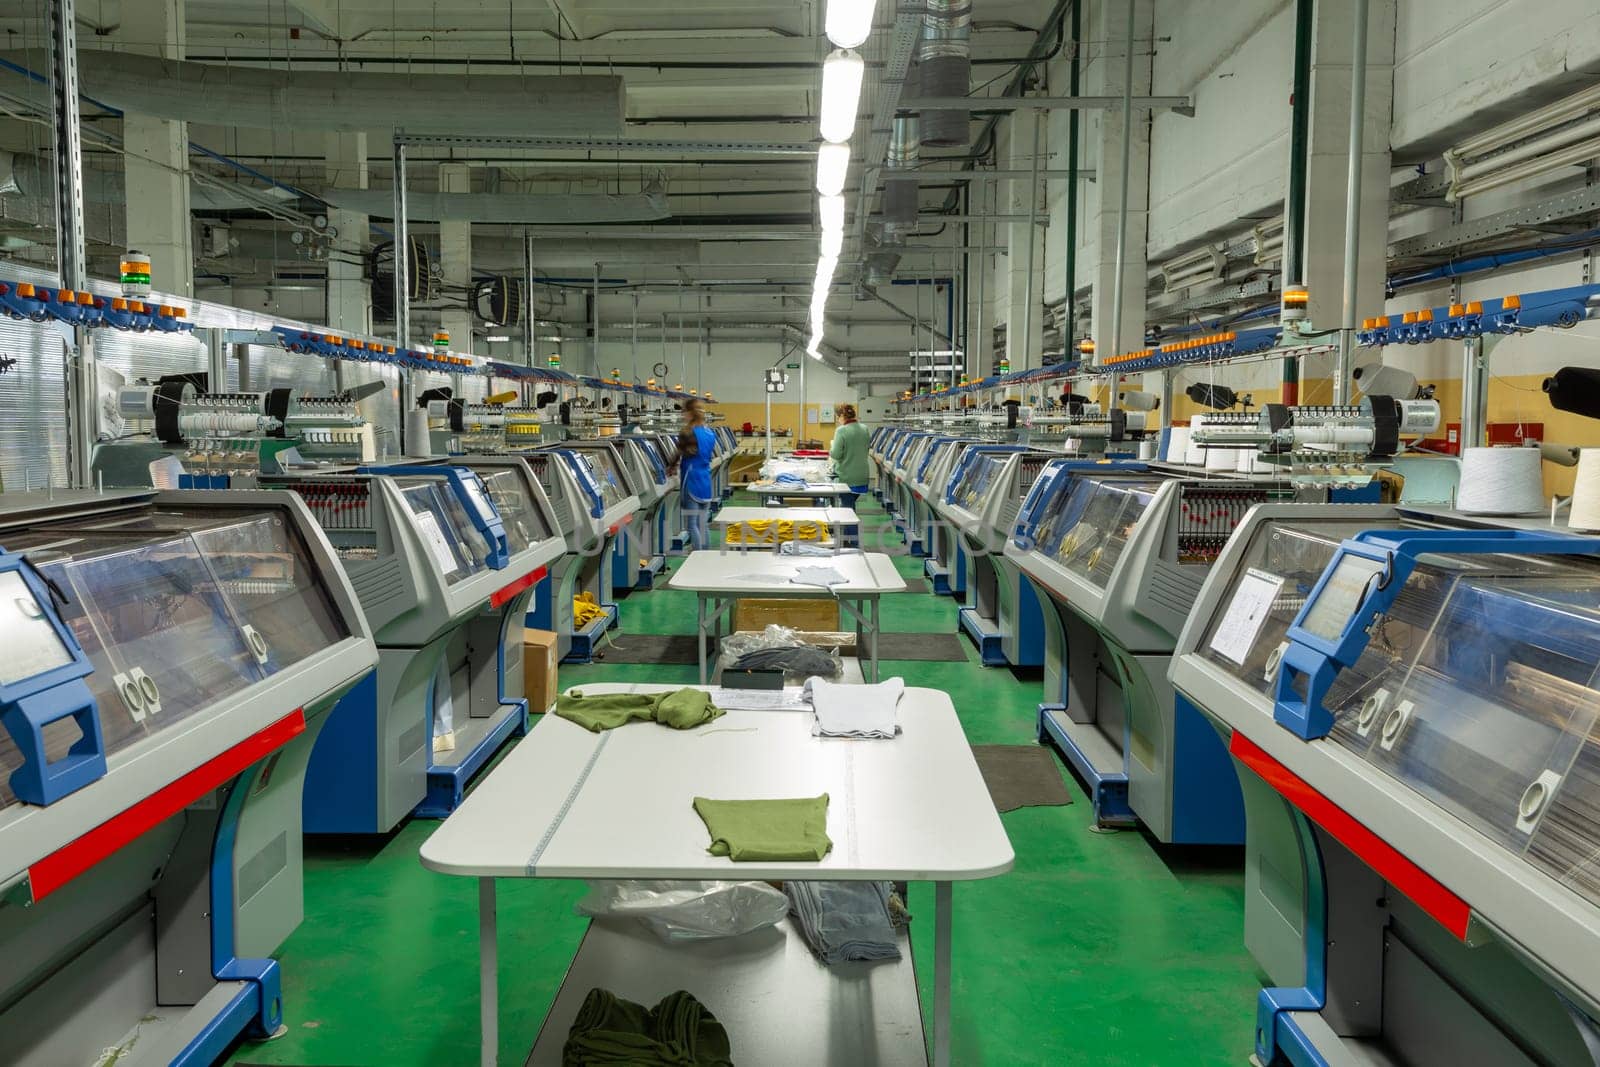 A row of industrial textil flat knitting machines in a knitwear factory. by BY-_-BY